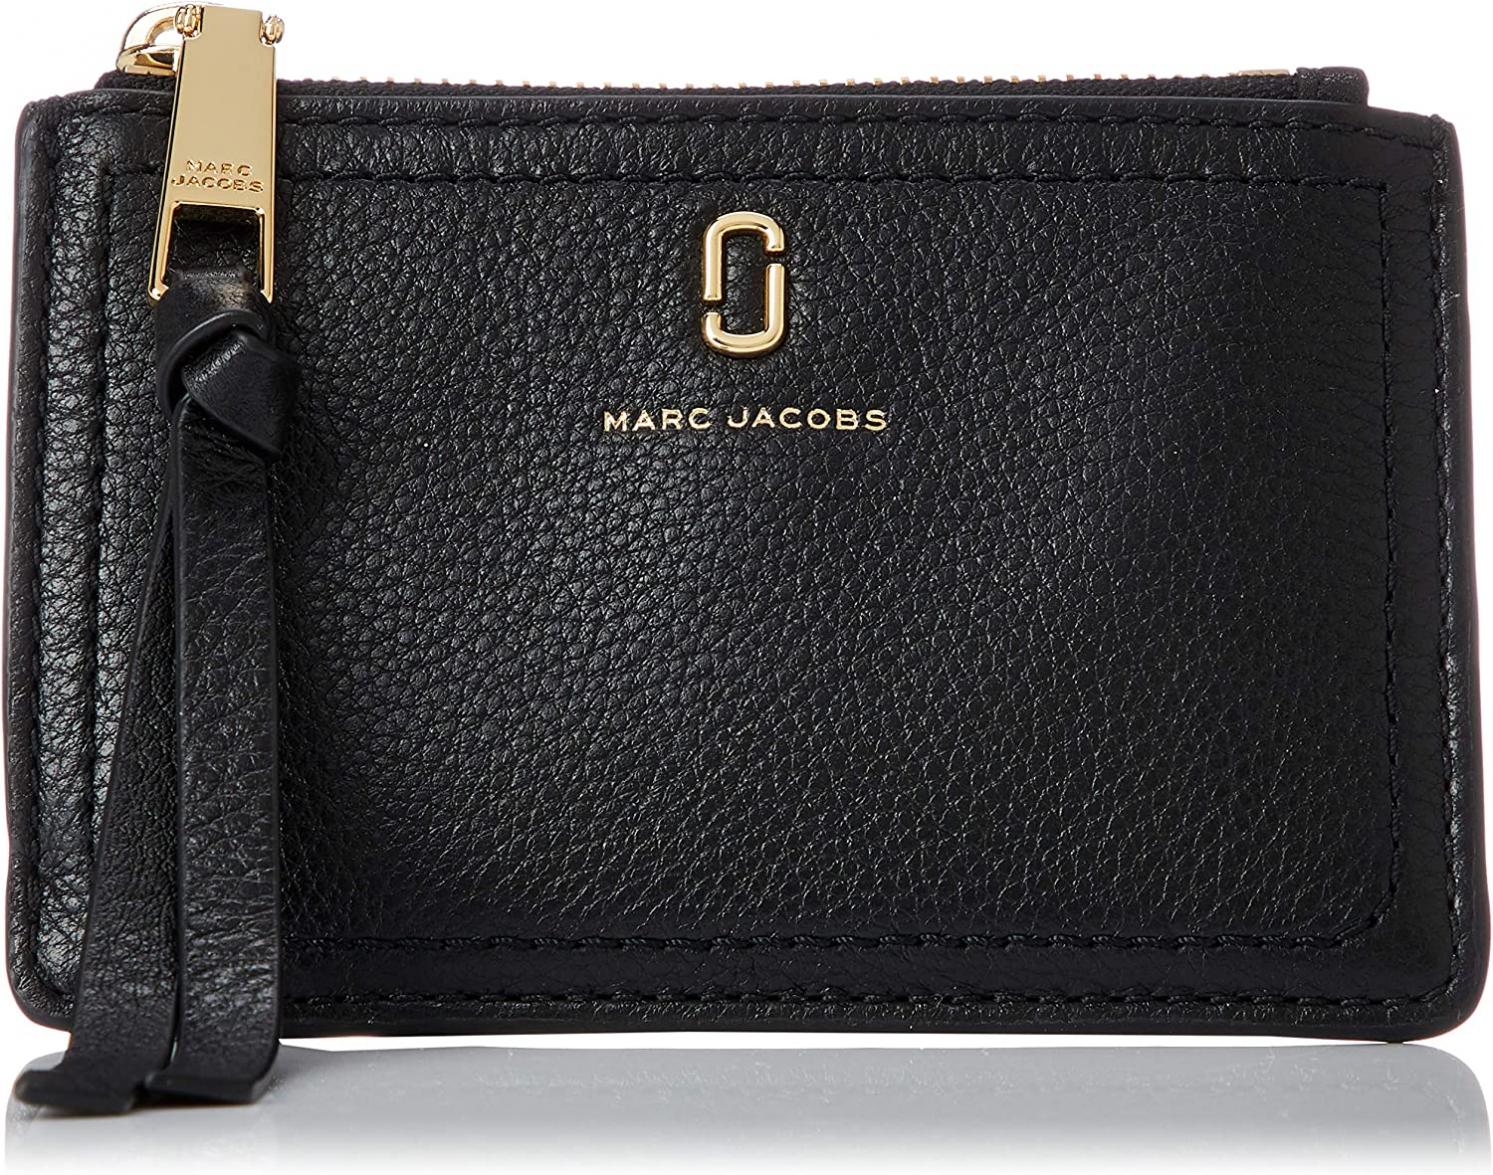 Marc Jacobs M0015123 TheSoftshot Commuter Wallet Key Ring Leather 3-Way [Parallel Import]